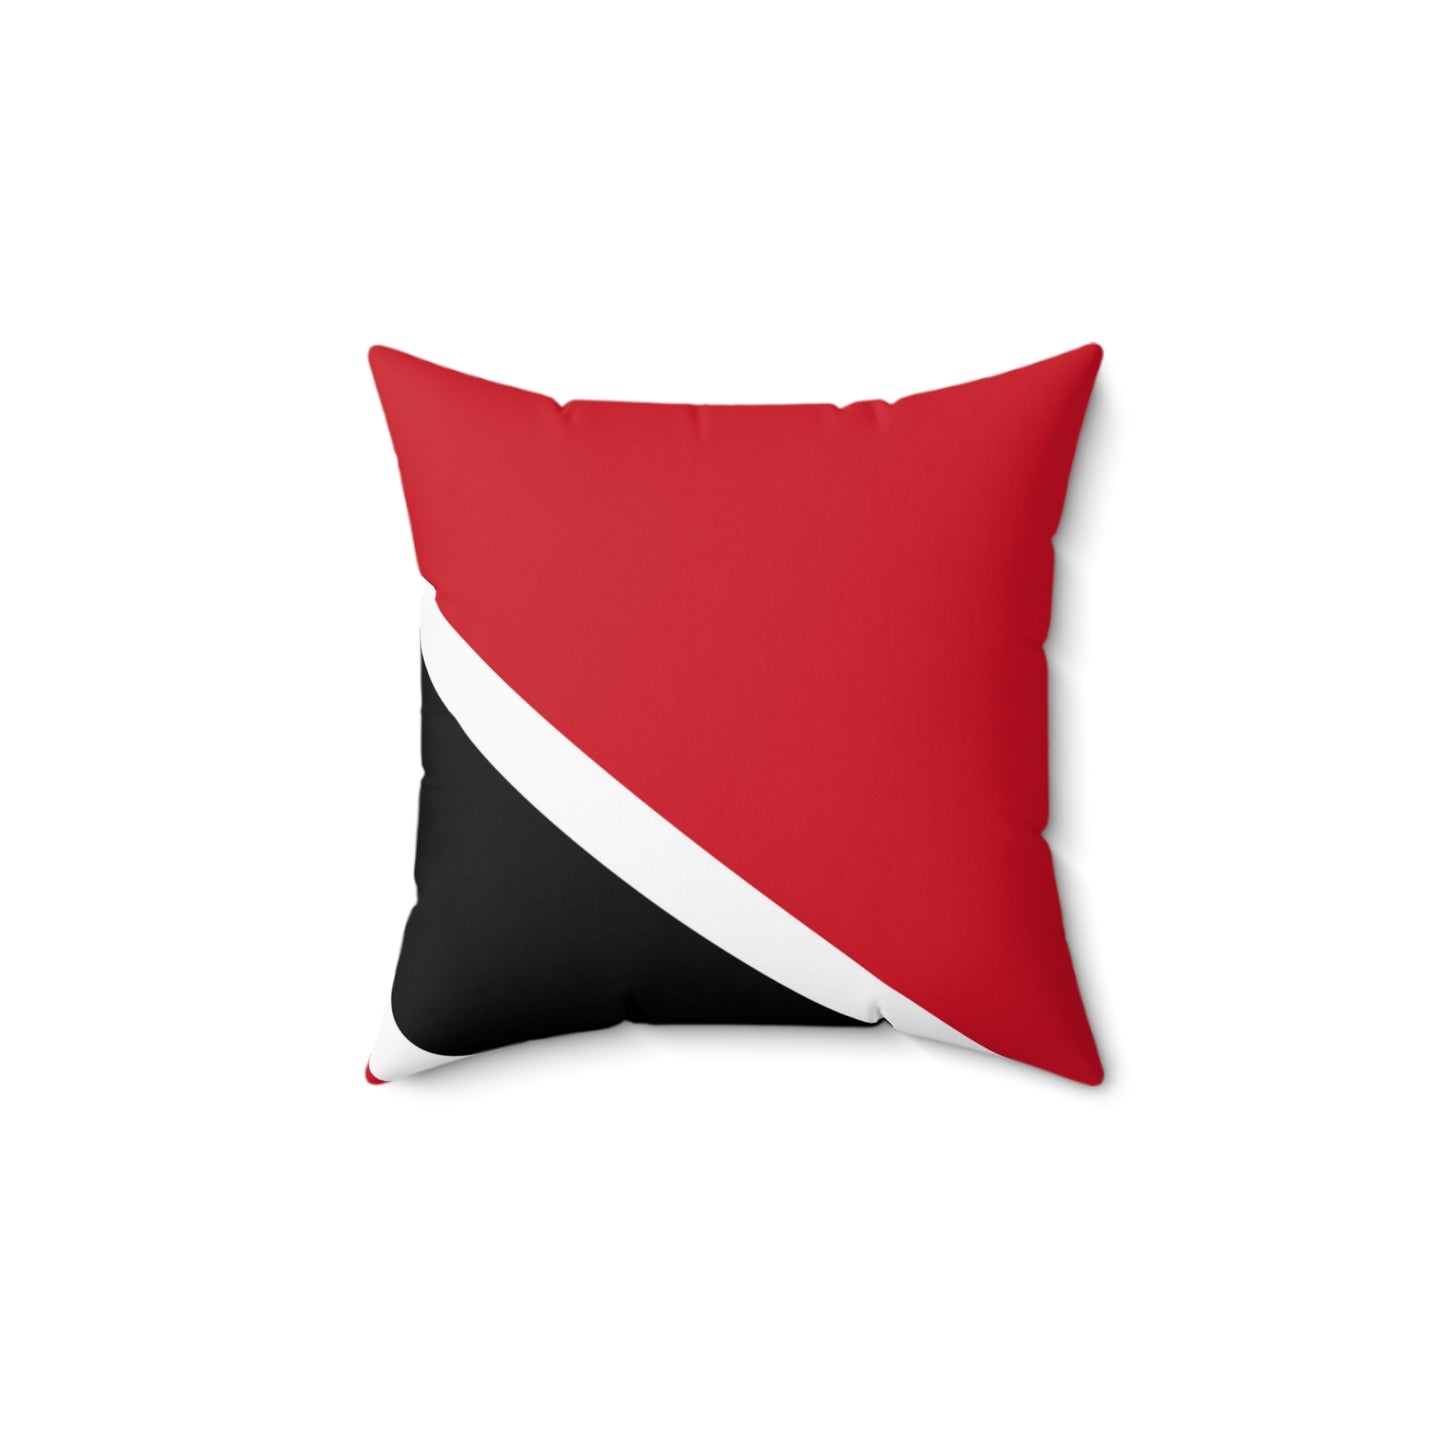 Red White and Black Pillow (14x14)